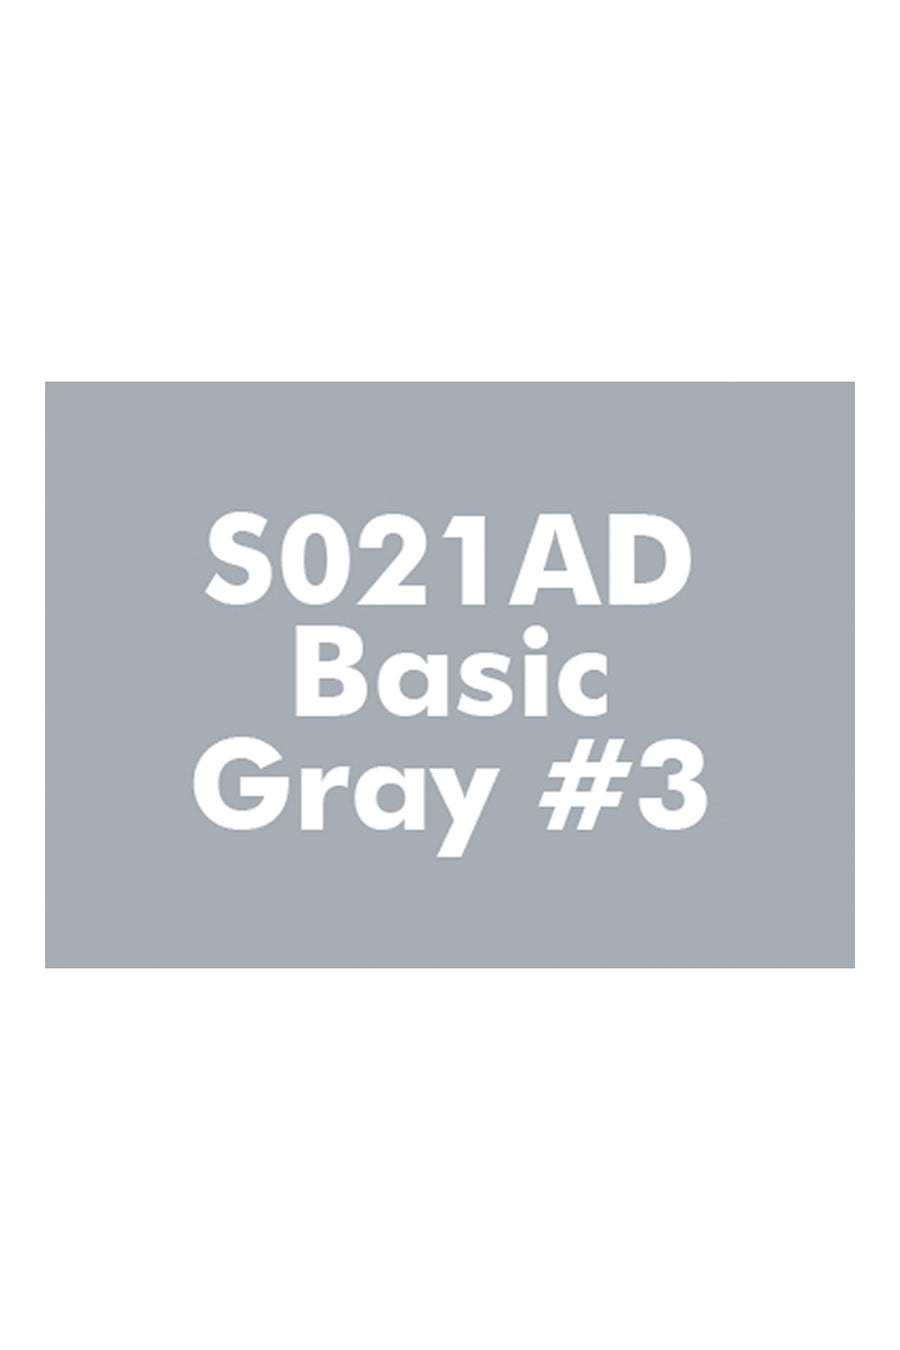 SPECTRA AD COOL GRAY 60%